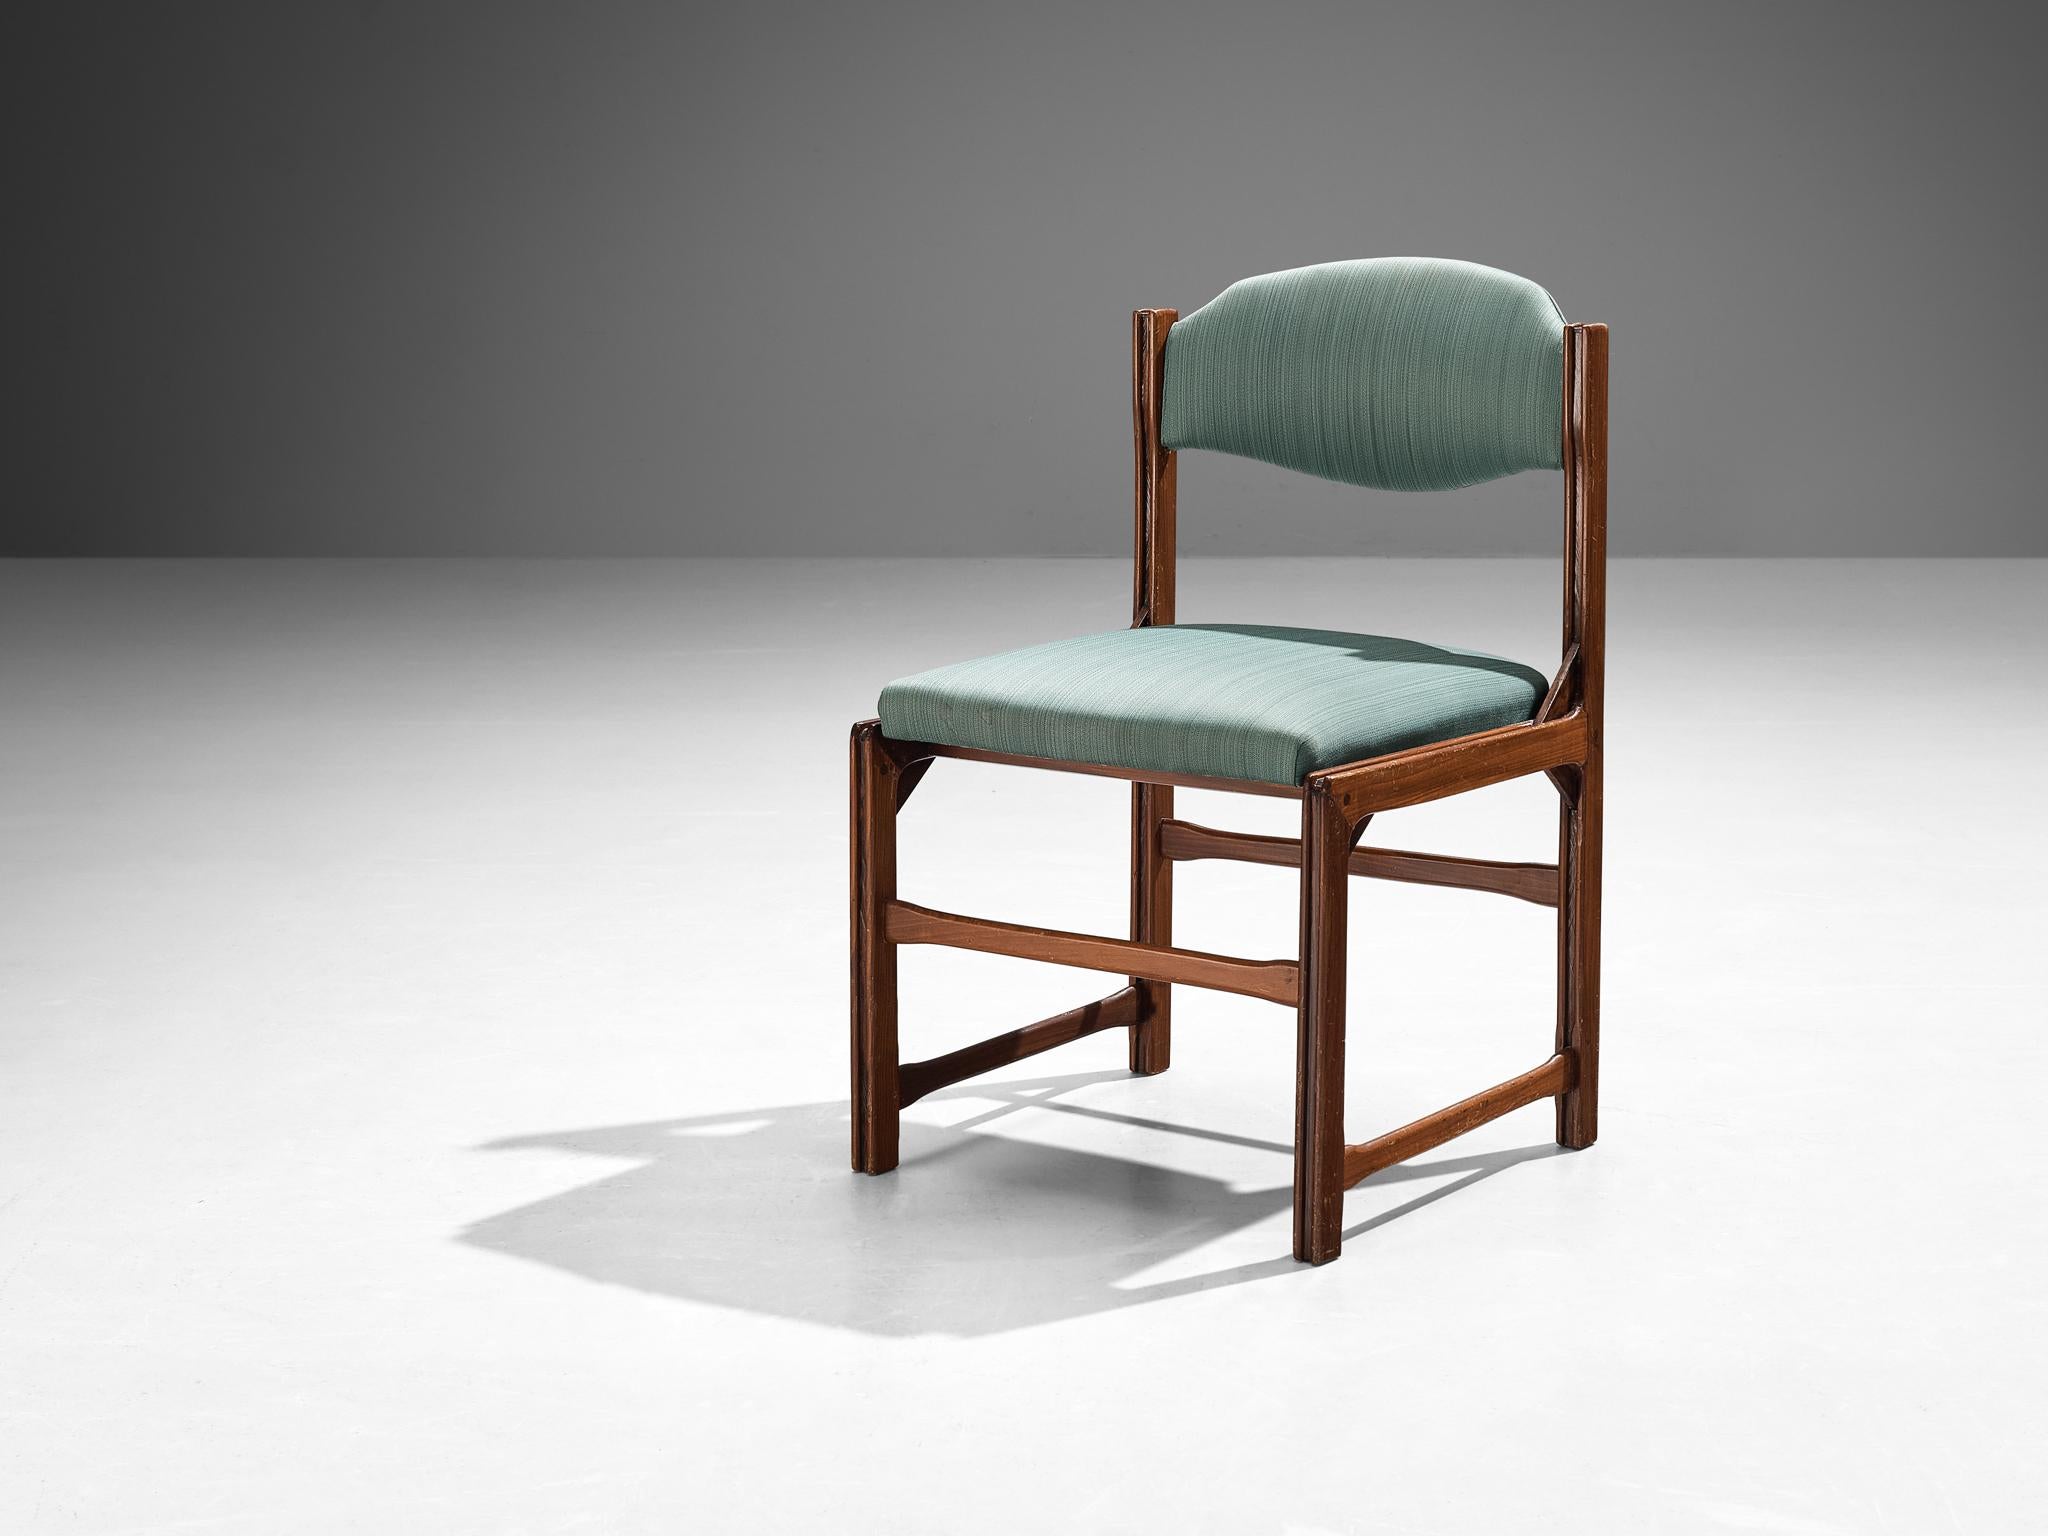 La Permanente Mobili Cantù, chair, cherry, fabric, Italy, 1960s

This chair is produced by La Permanente Mobili Cantu in the sixties and employs the Italian aesthetic vocabulary and typical woodwork. The framework in cherry features intricate